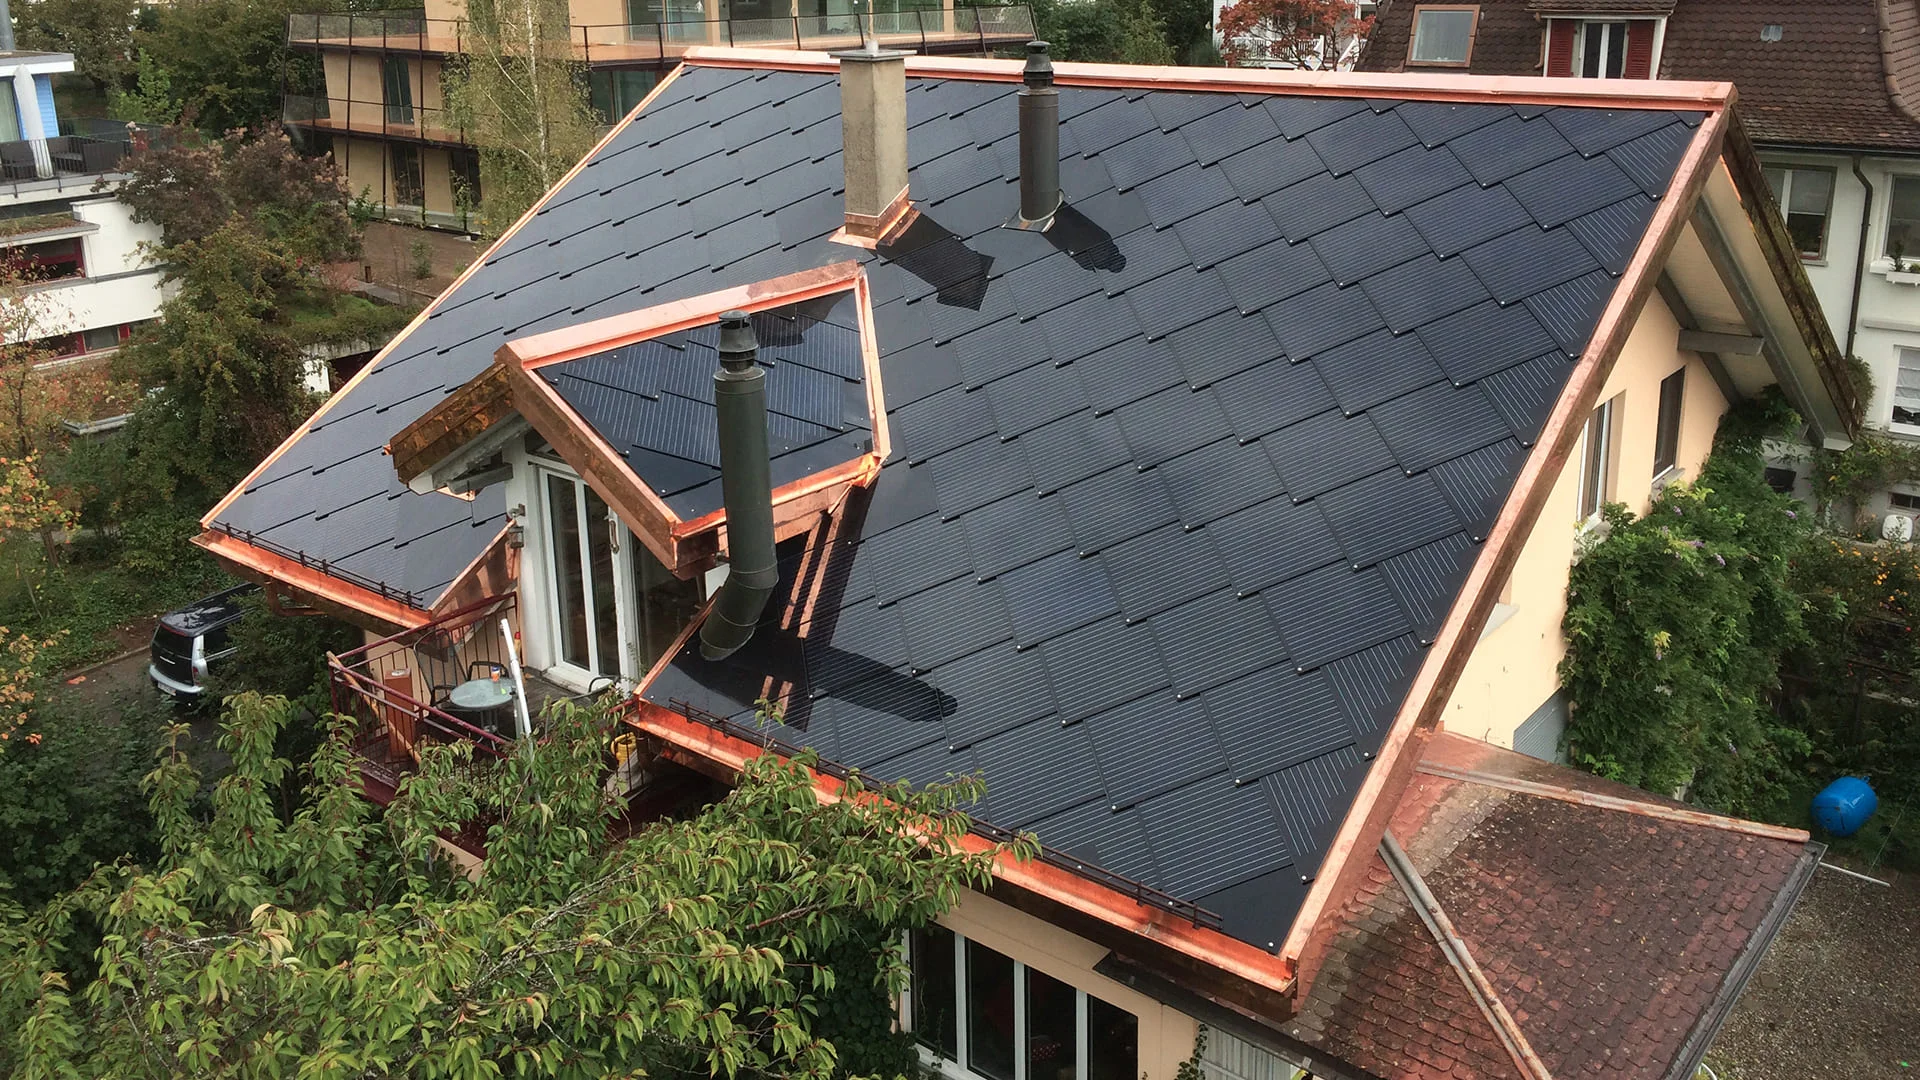 SunStyle solar tiles on a multi-family housing building where active solar tiles cover all areas that receive maximum sunlight.